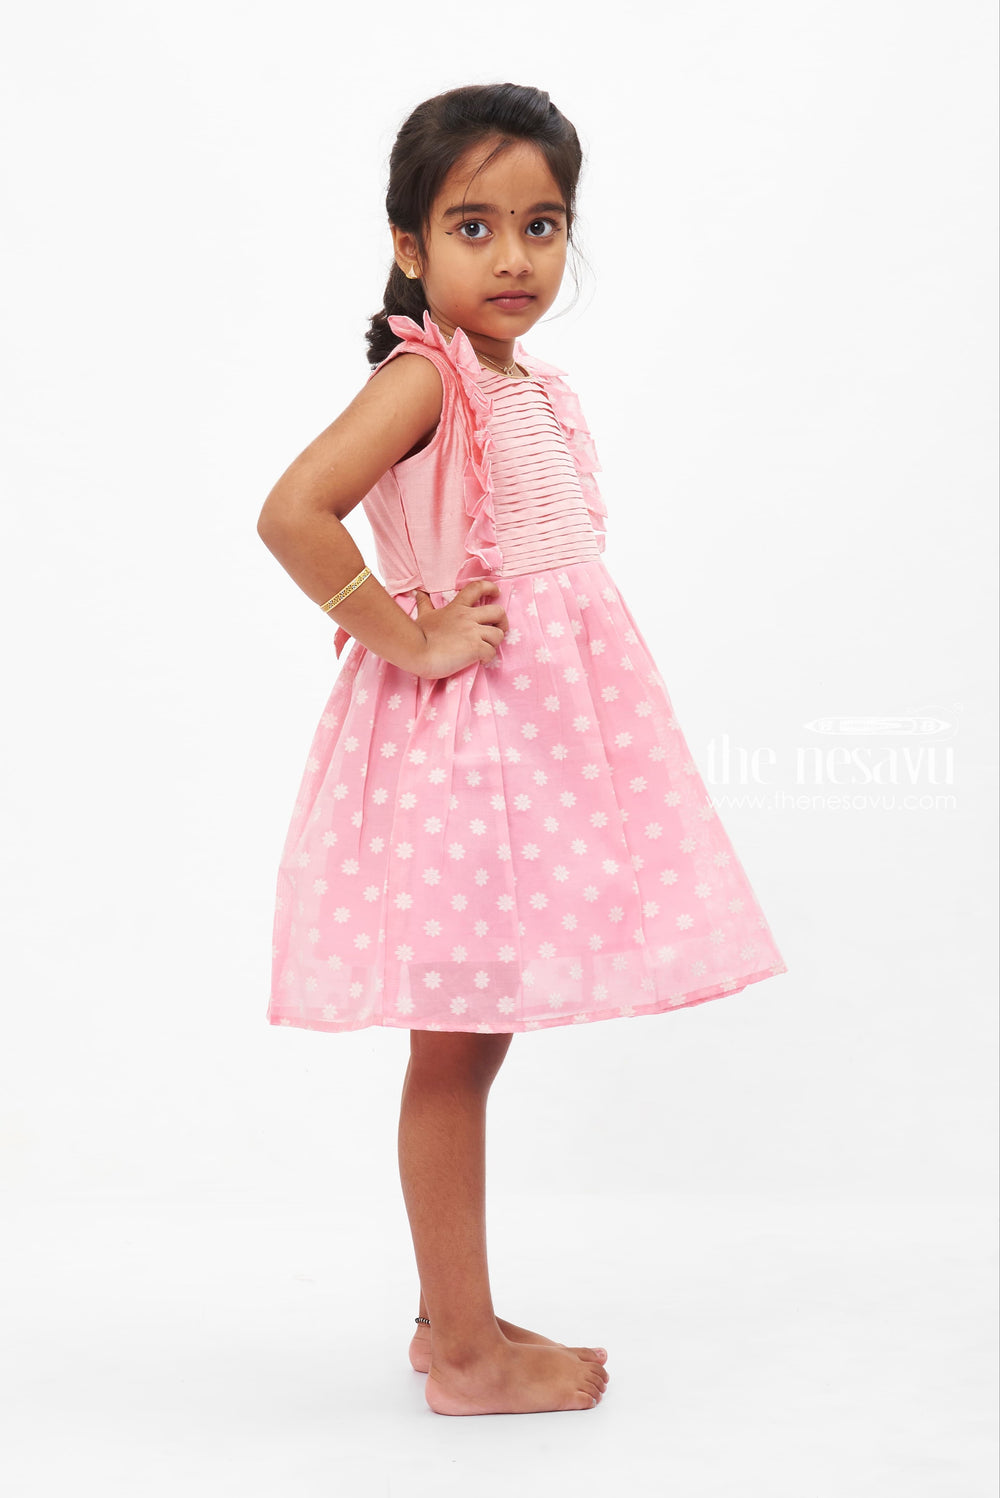 The Nesavu Baby Cotton Frocks Pretty in Pink Floral Accented Pleated Baby Frock for Girls Nesavu Girls Pink Pleated Floral Dress | Delicate Summer Style | The Nesavu